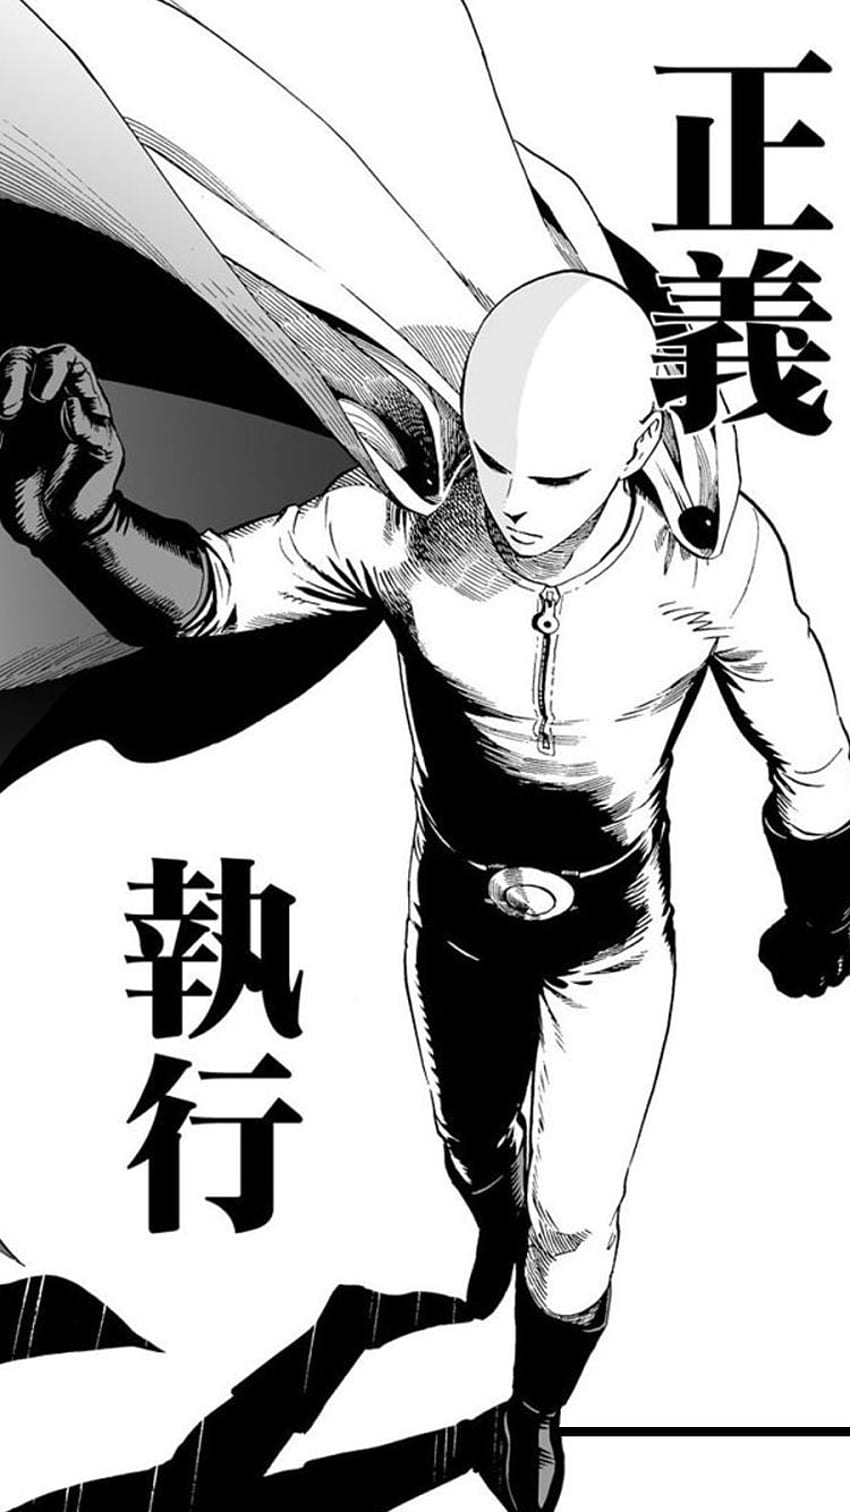 One Punch Man, amoled, black and white, HD phone wallpaper